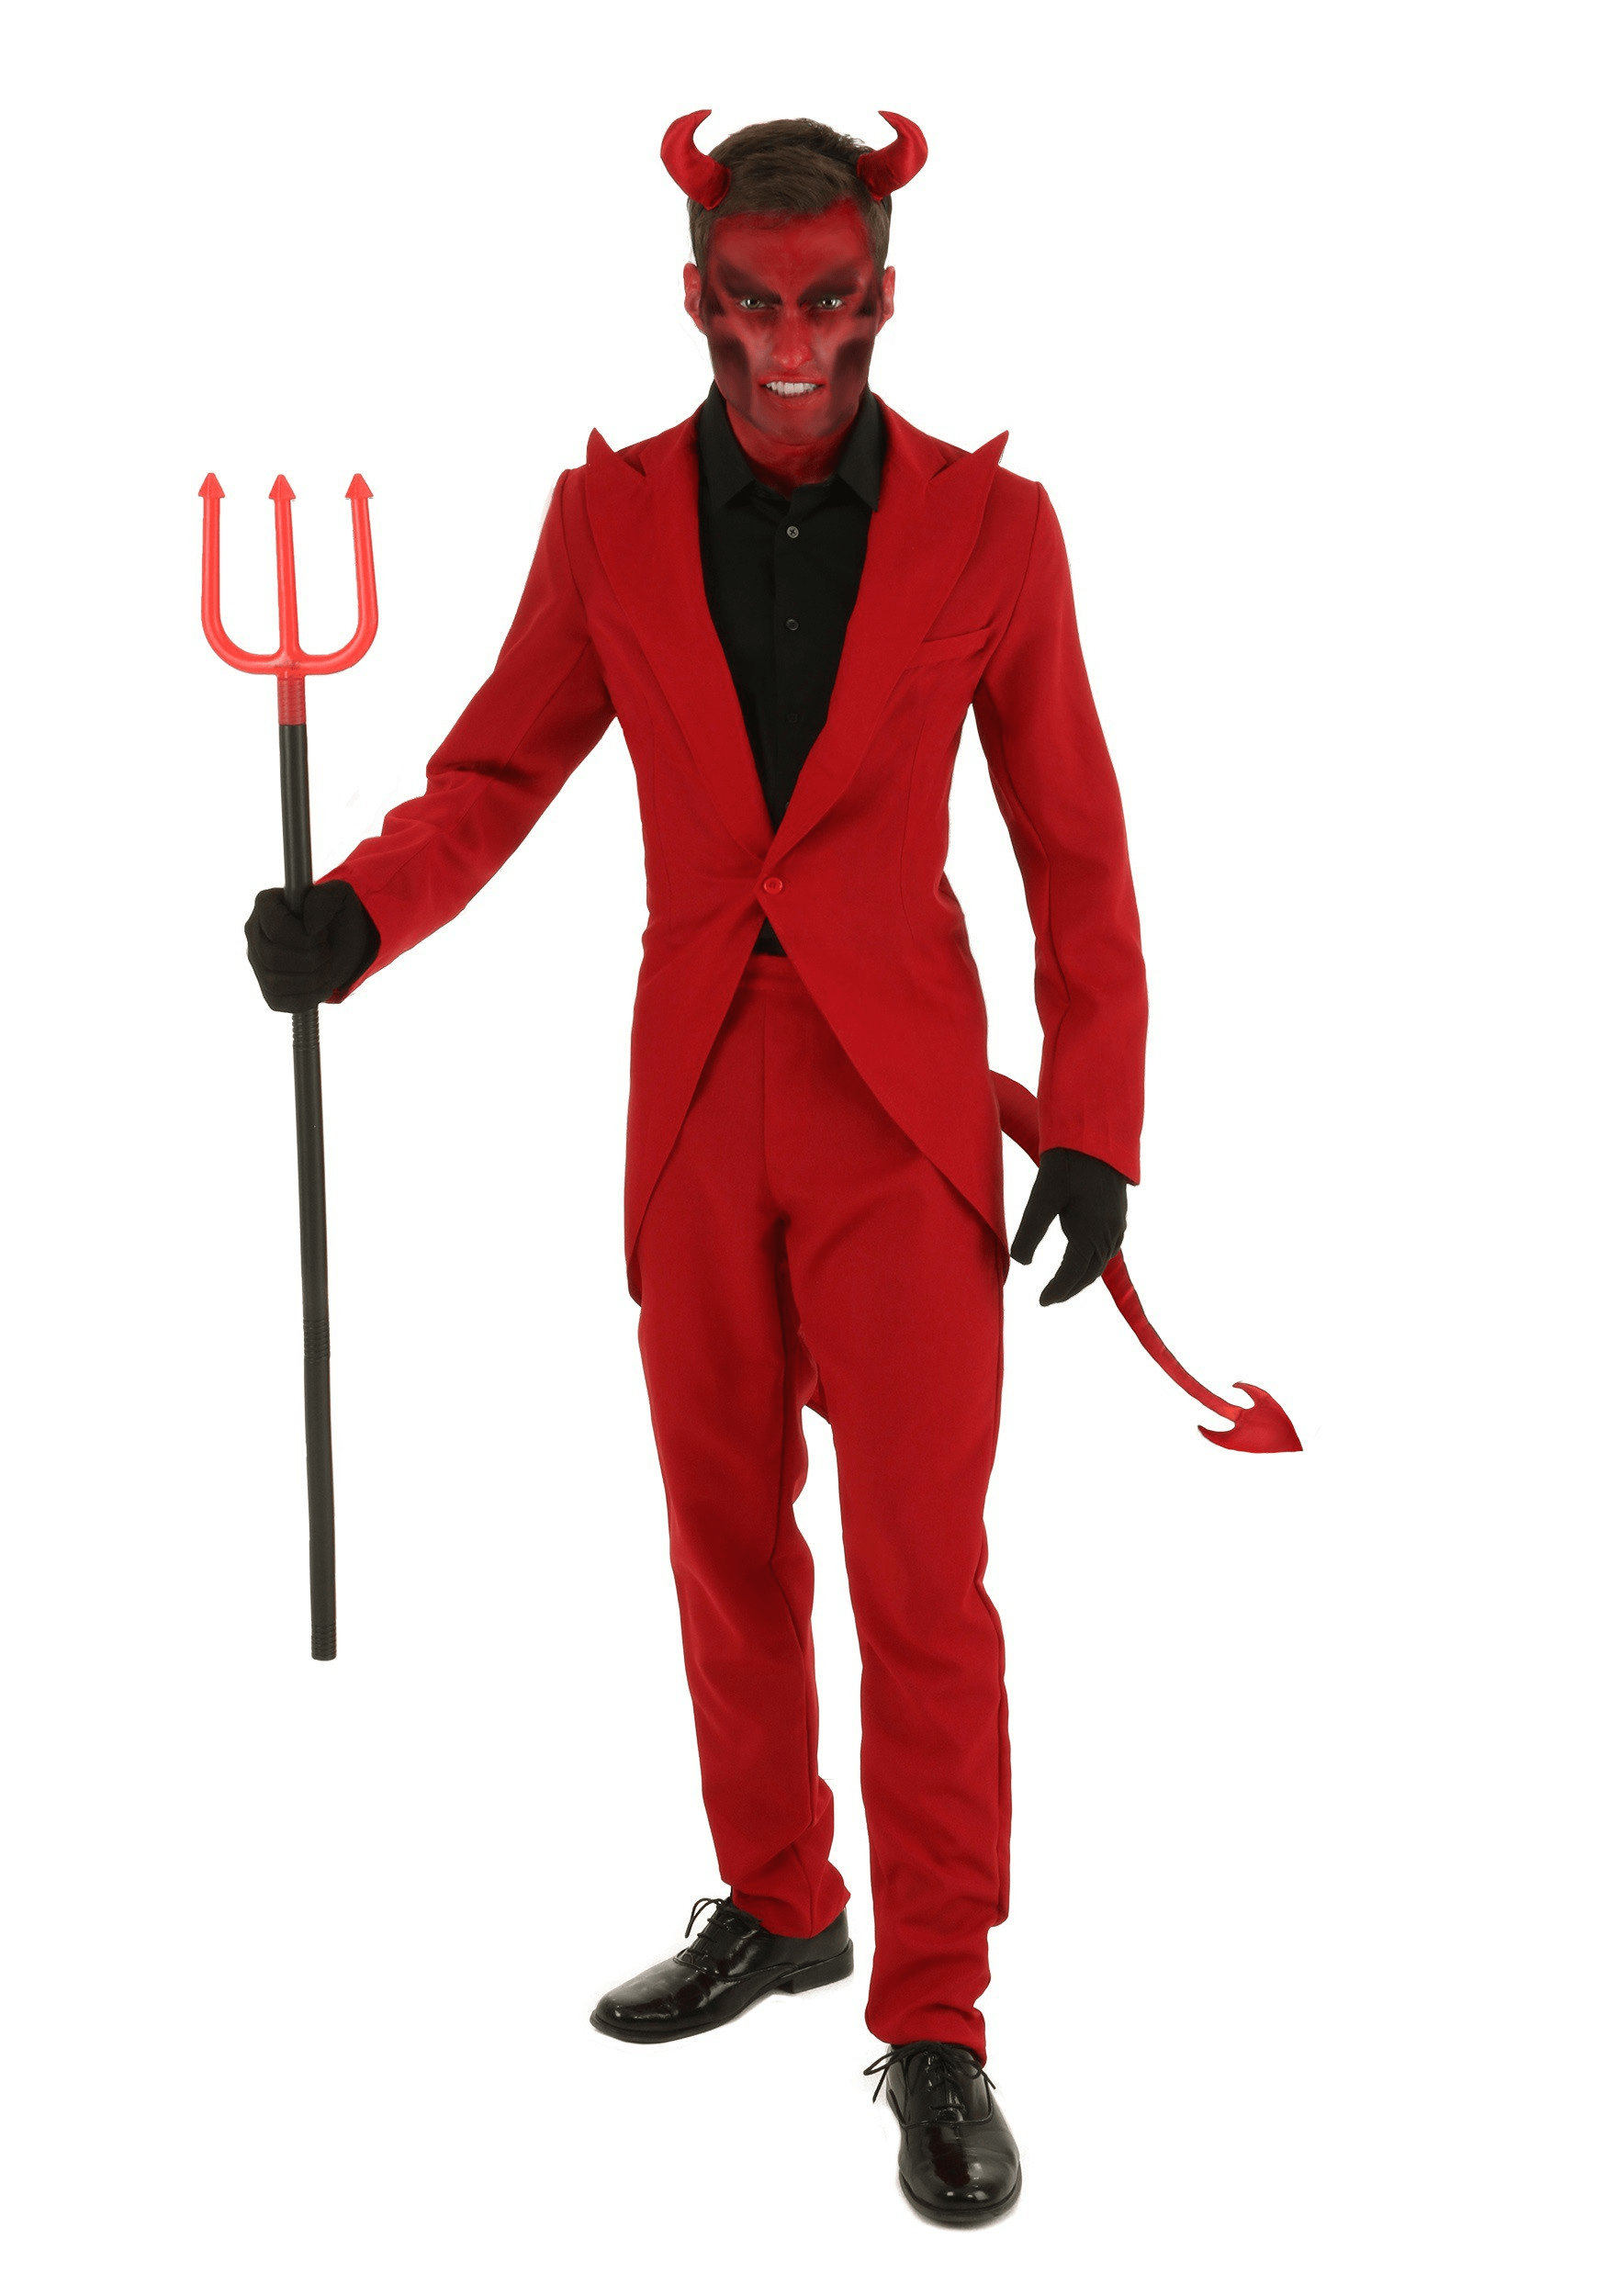 https://images.halloweencostumes.ca/products/32735/1-1/adult-red-suit-devil-costume-update.png